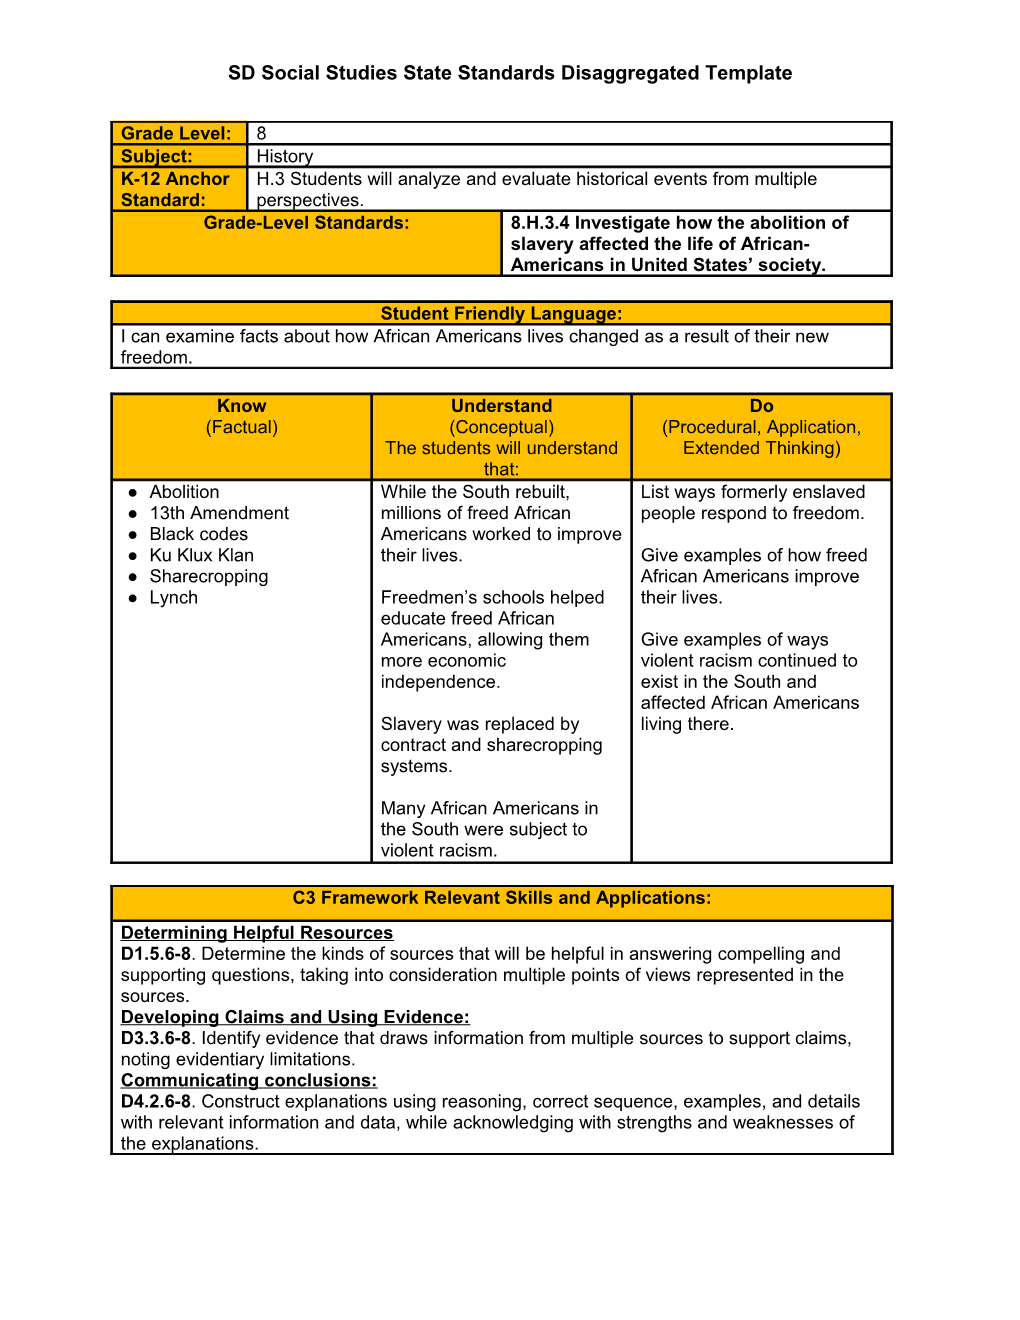 SD Social Studies State Standards Disaggregated Template s1